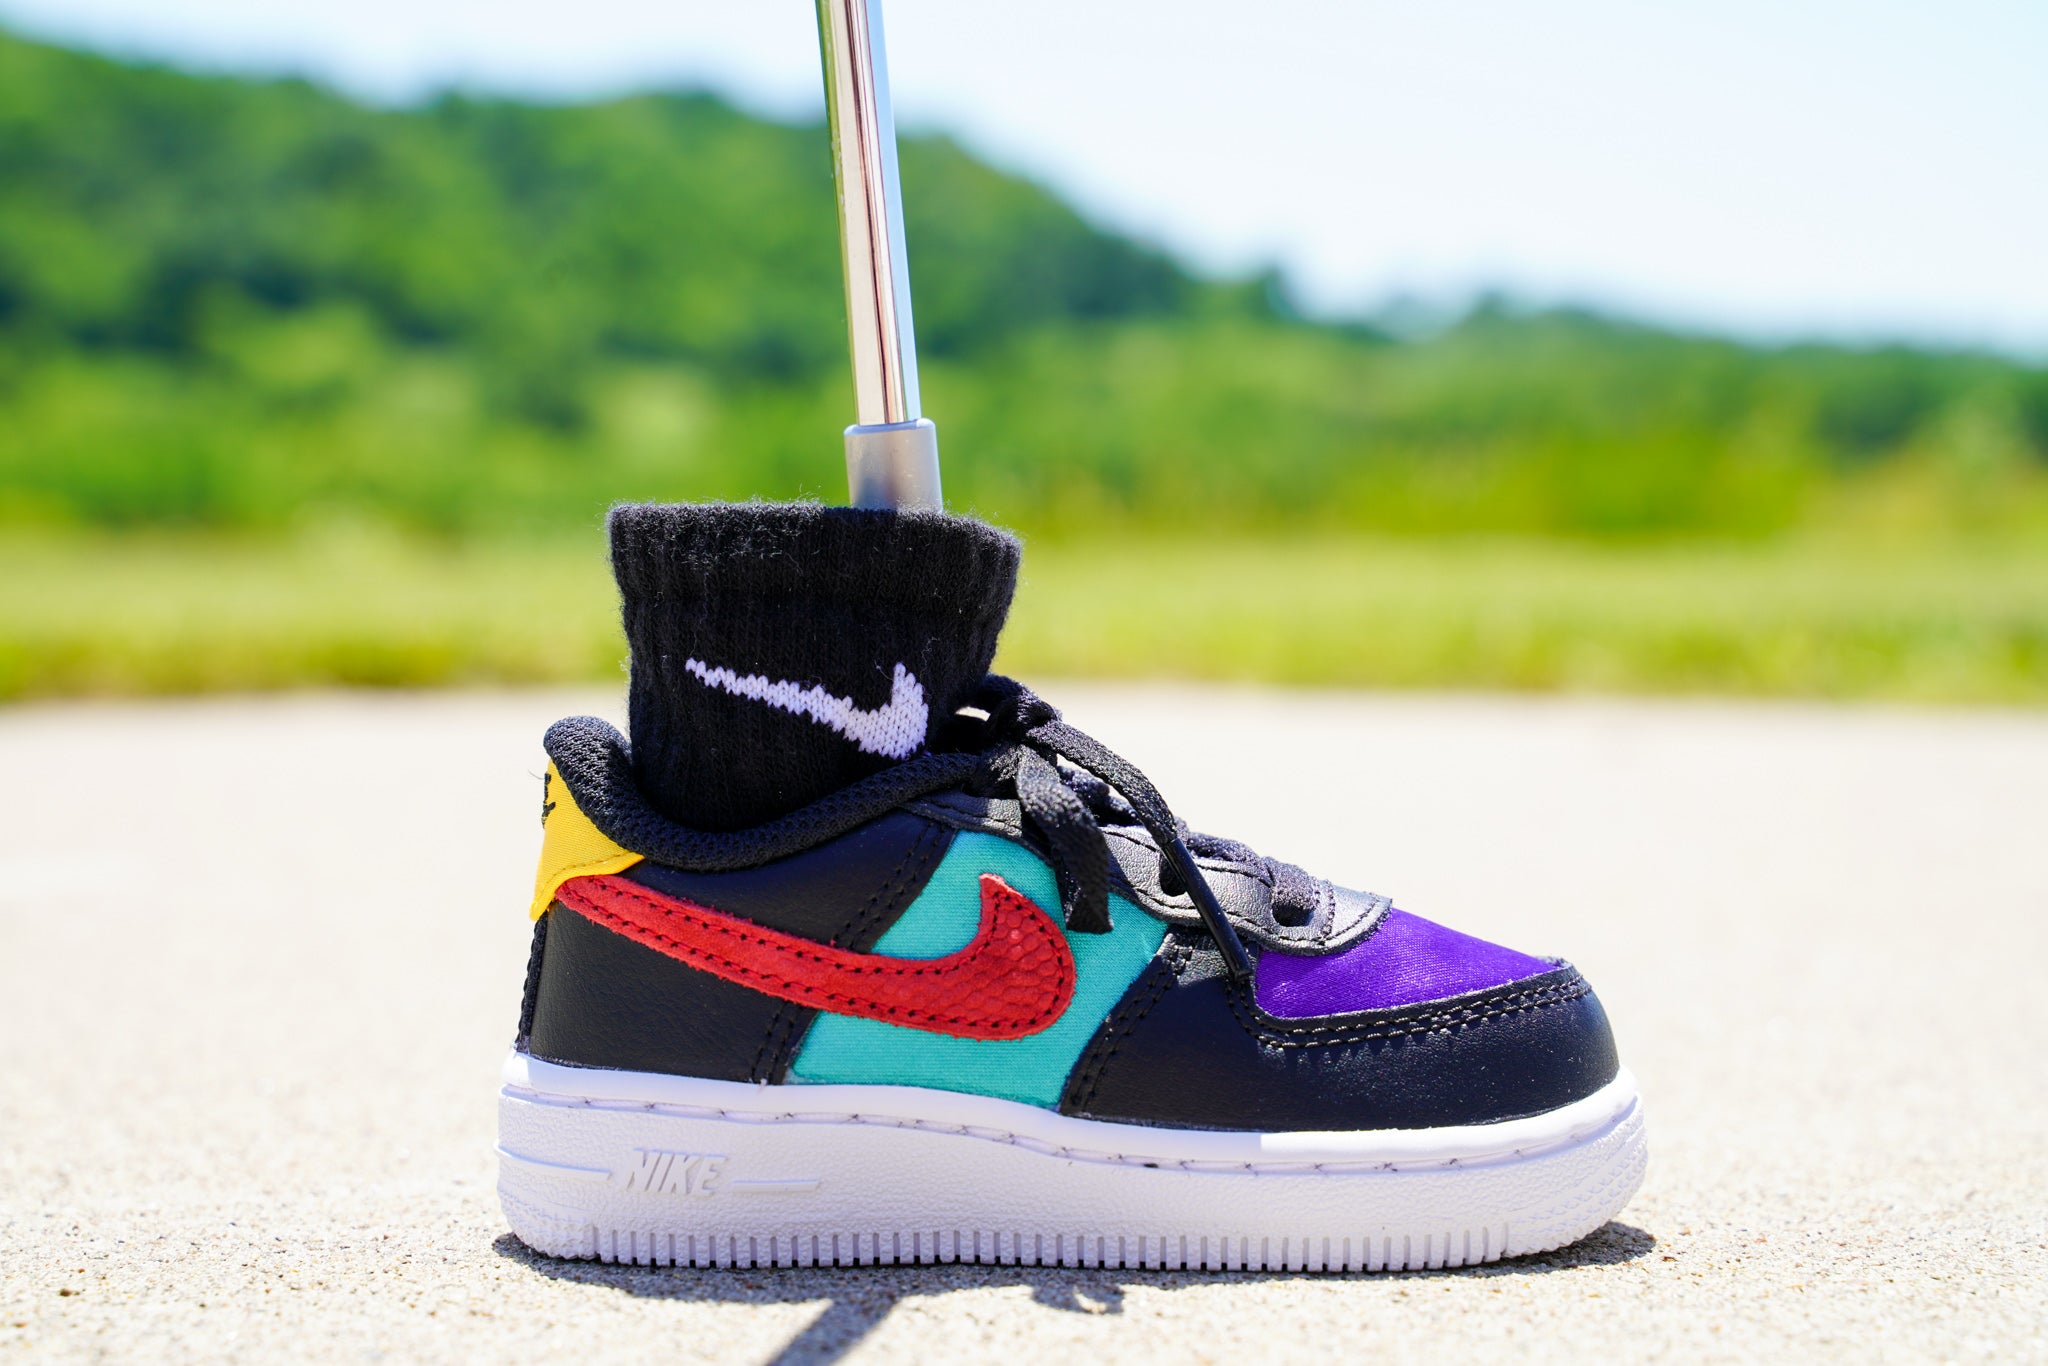 Nike Air Force 1 LV8 EMB Black/Gym Red/Washed Teal/Court Purple